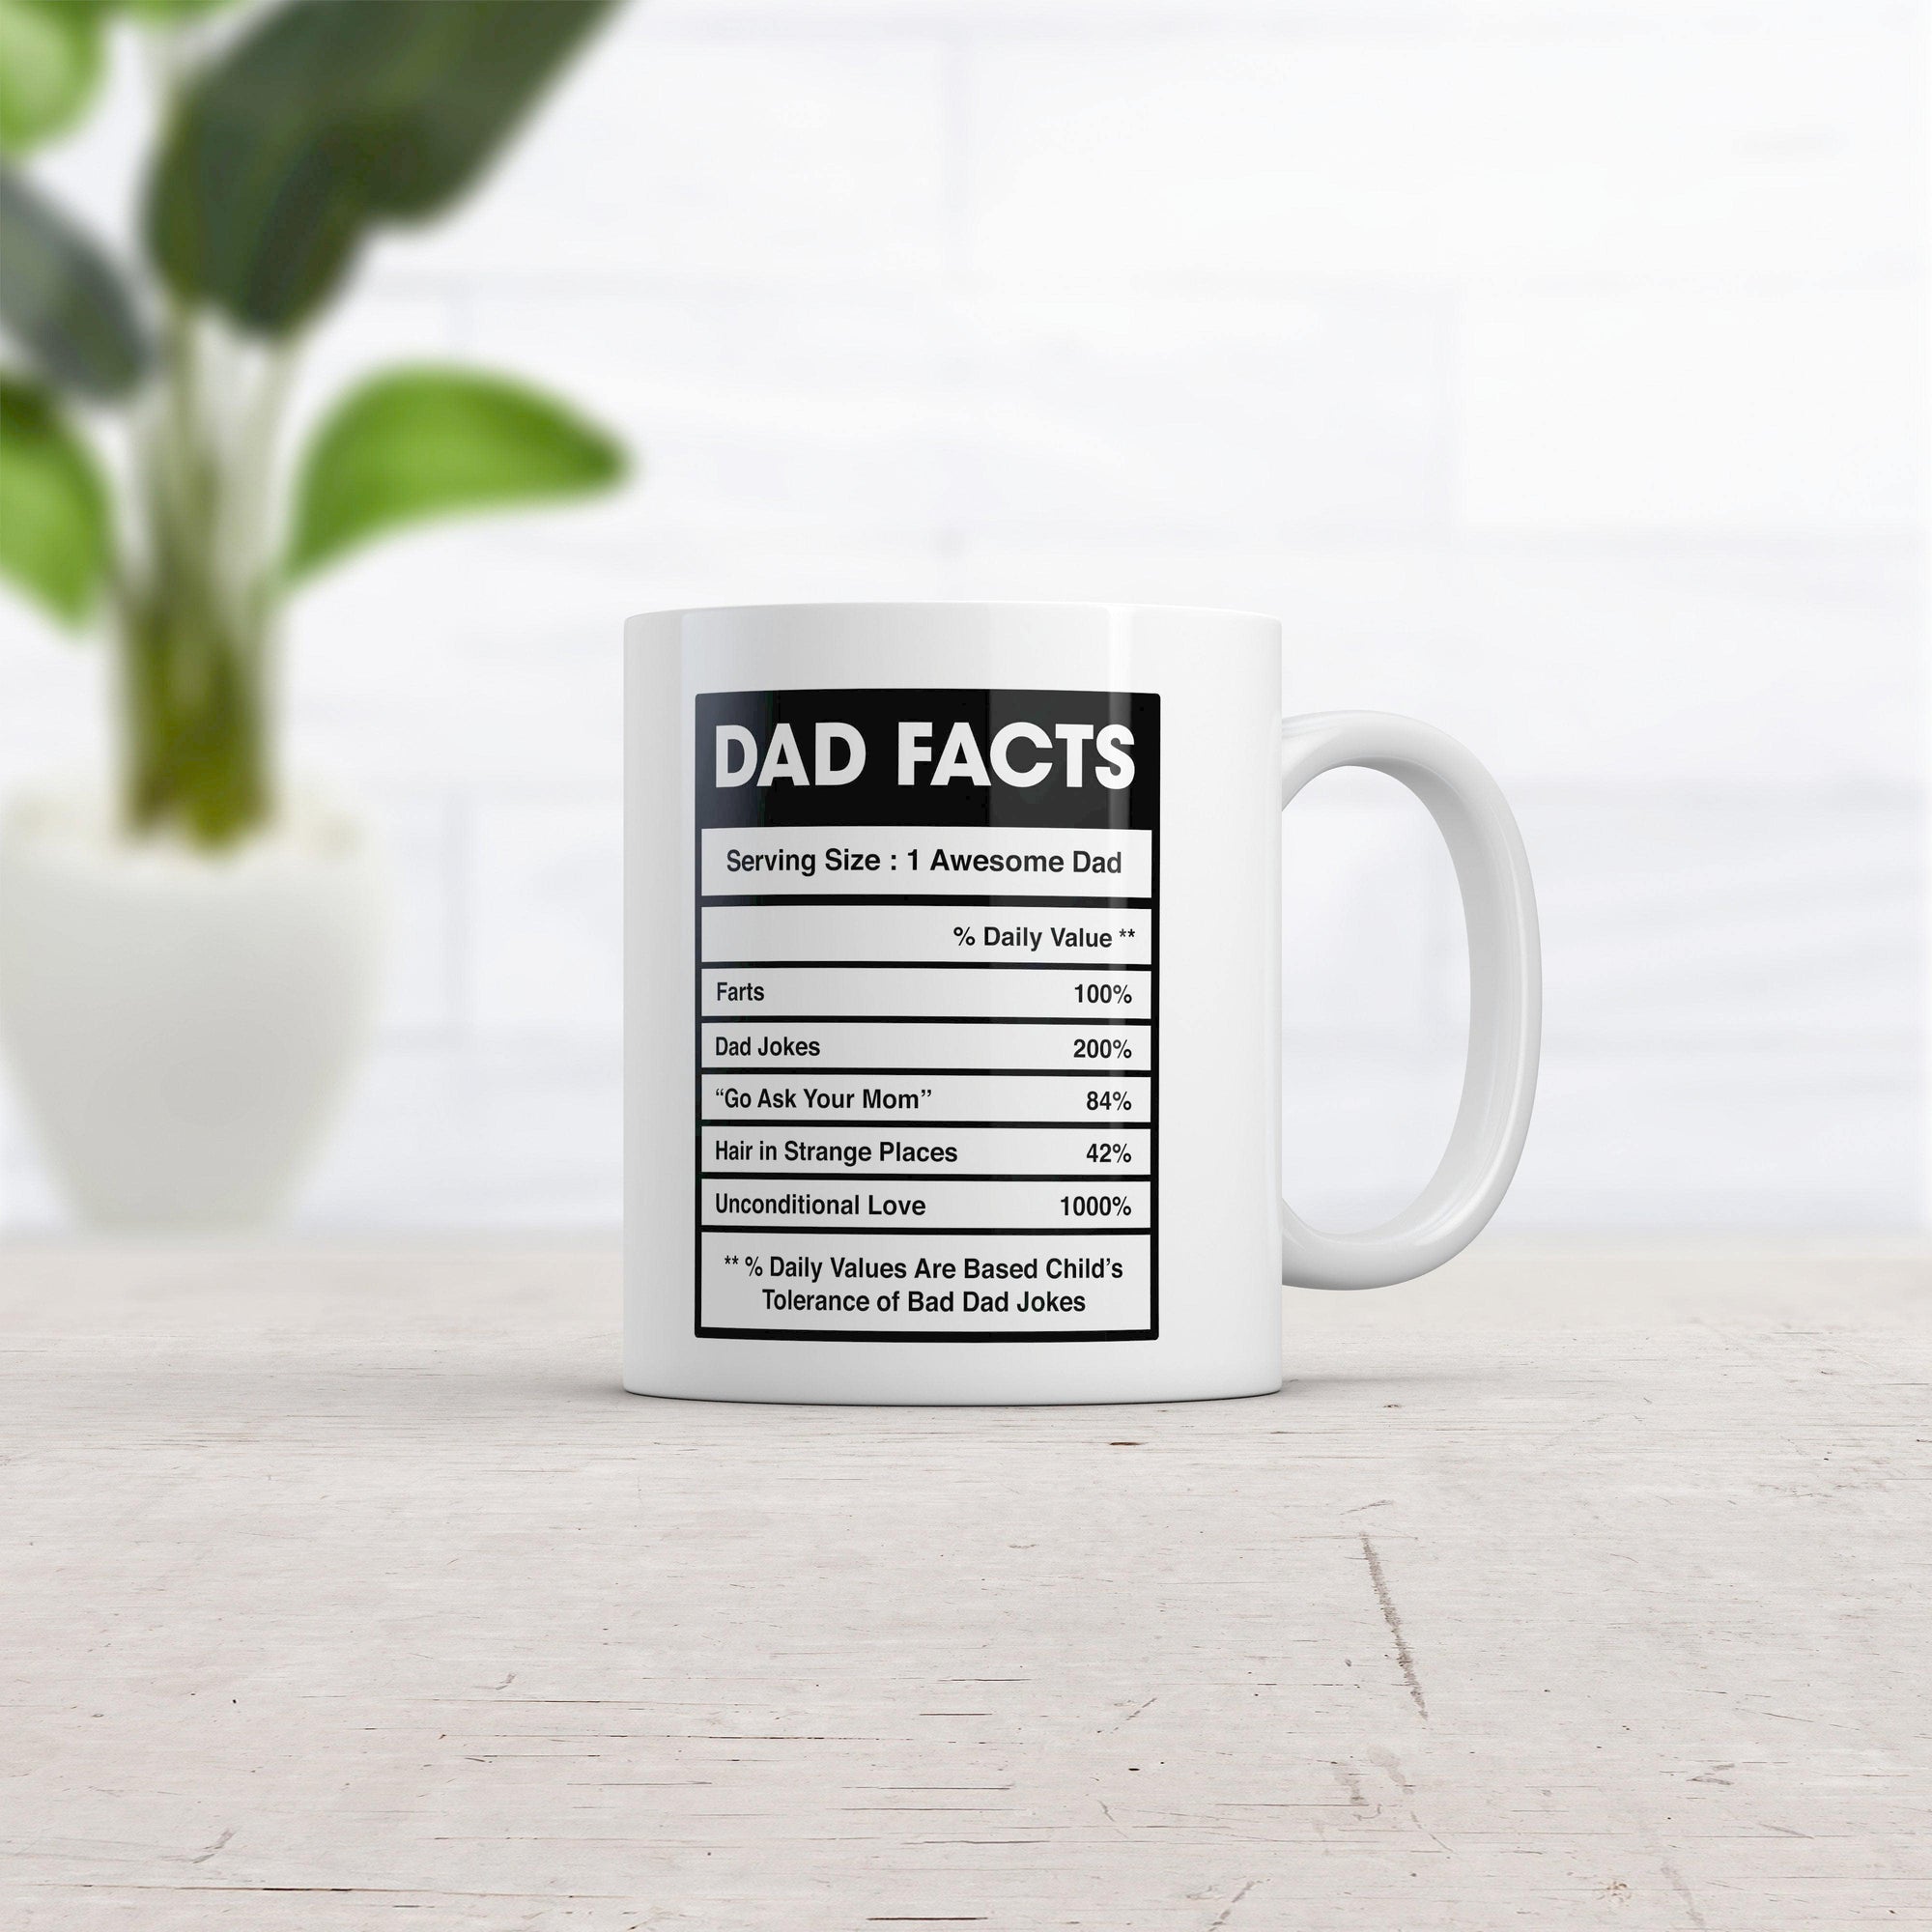 Dad Nutrition Facts Mug Funny Sarcastic Father's Day Family Humor Novelty Coffee Cup-11oz  -  Crazy Dog T-Shirts